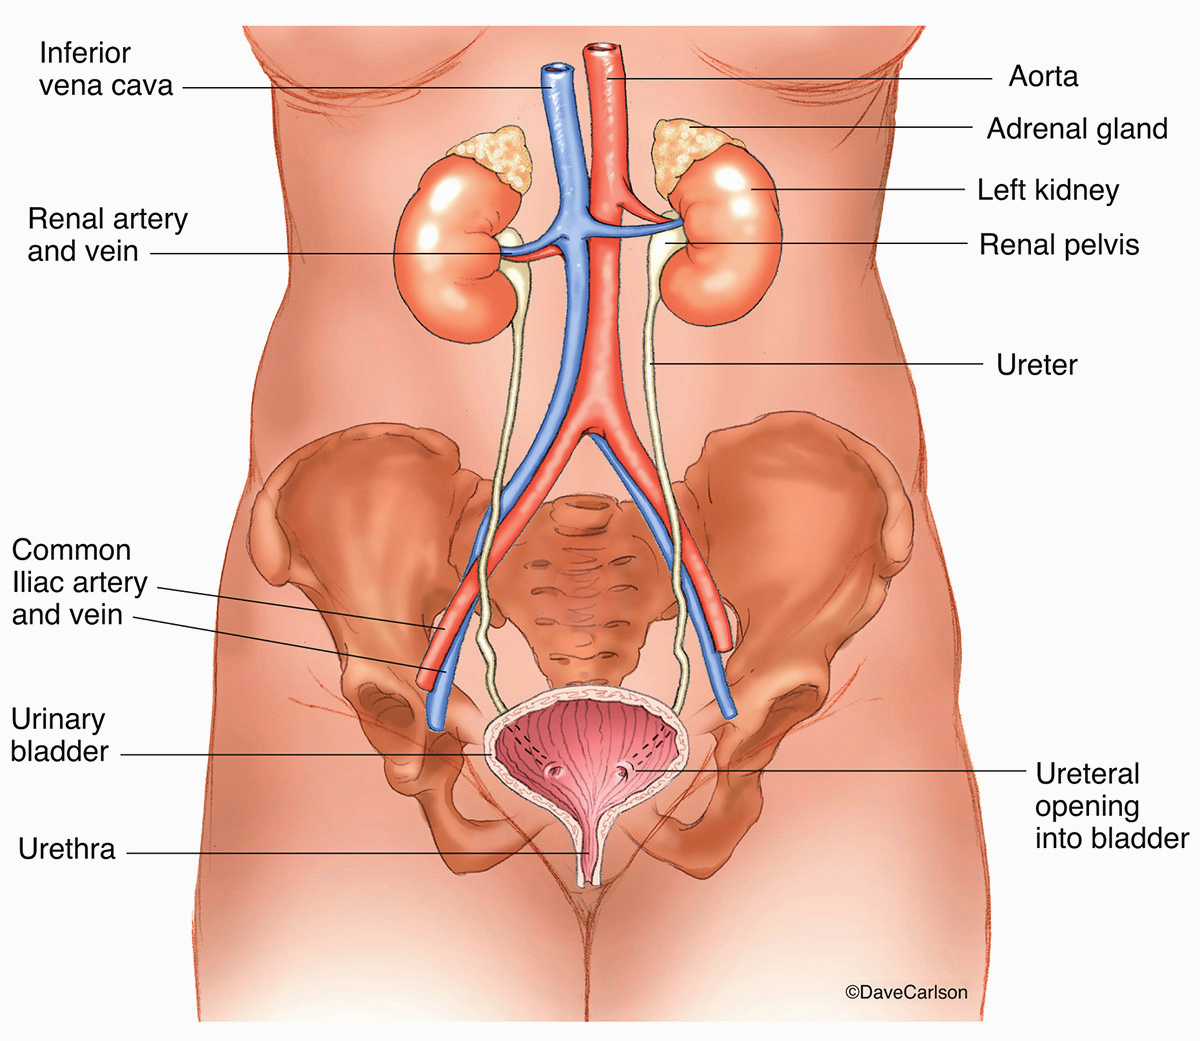 Illustration of the urinary system and its blood supply.